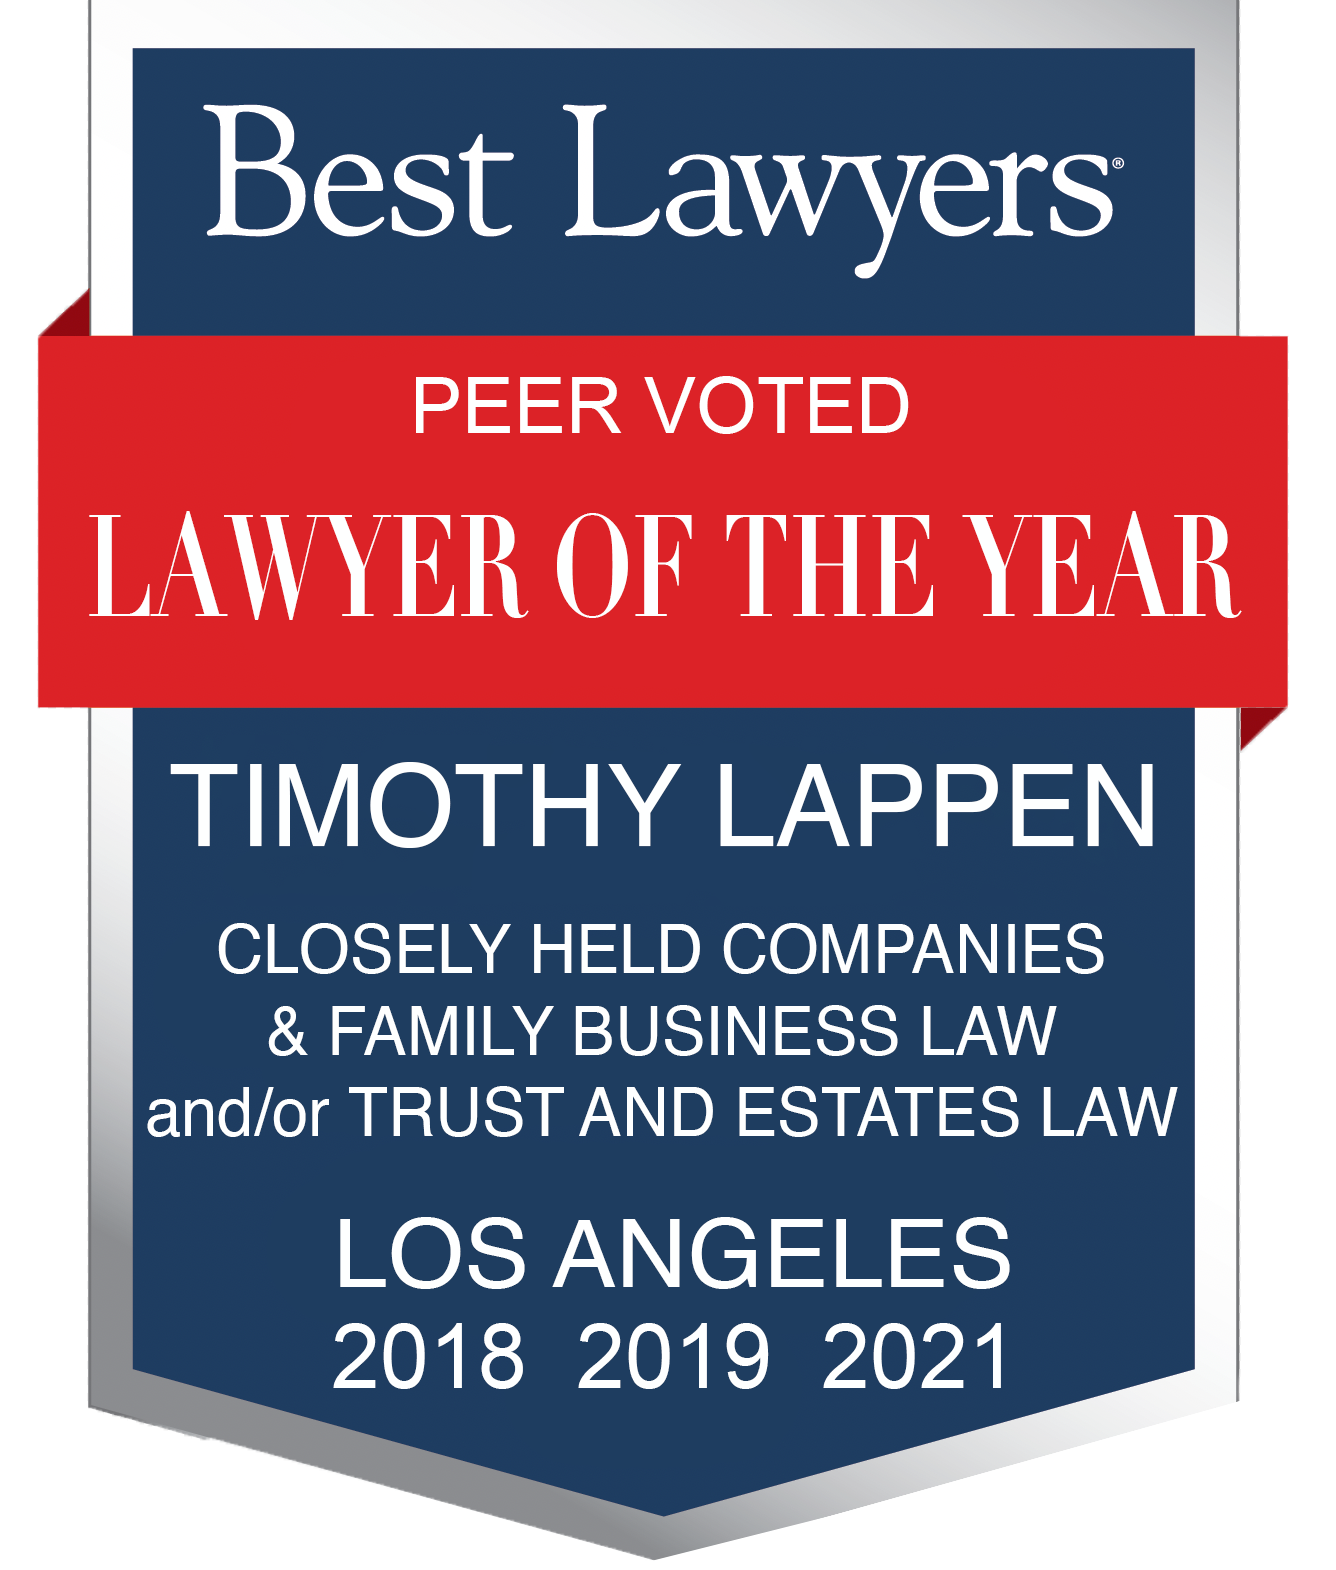 Best Lawyers - Lawyer of the Year - Timothy Lappen